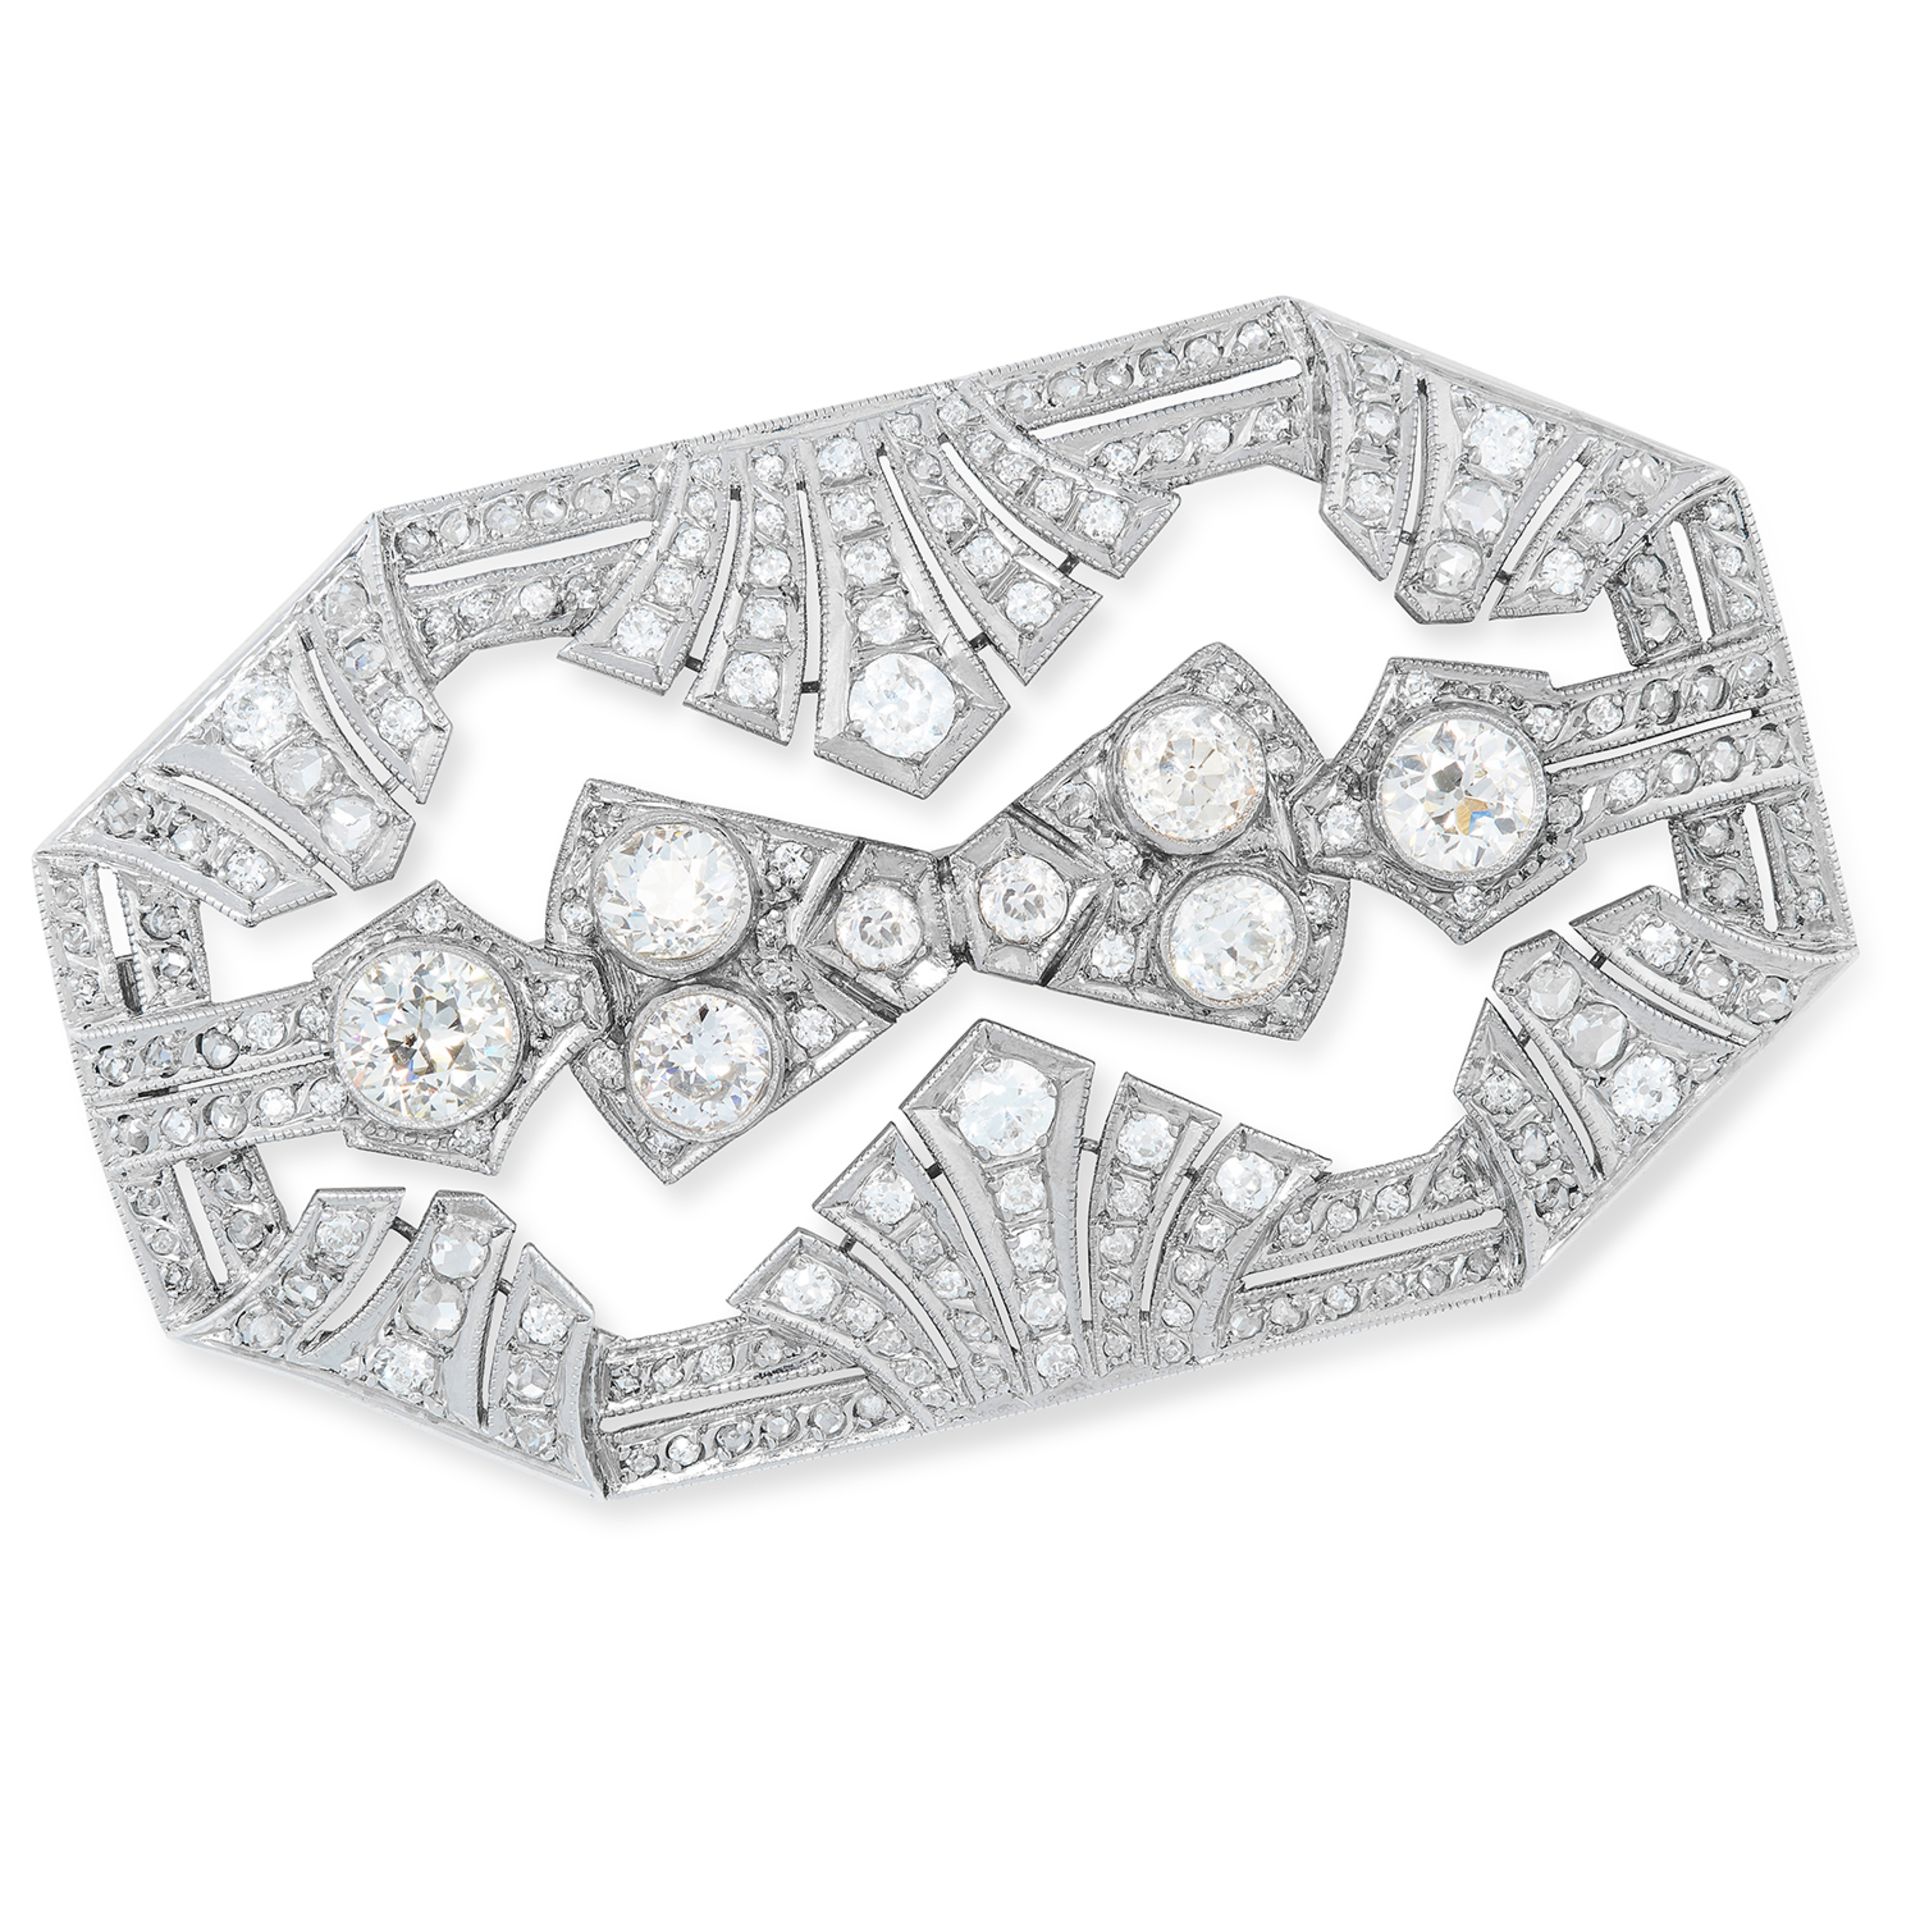 AN ANTIQUE ART DECO DIAMOND BROOCH in platinum, in an open framework set with 4.5 - 5.5 carats of